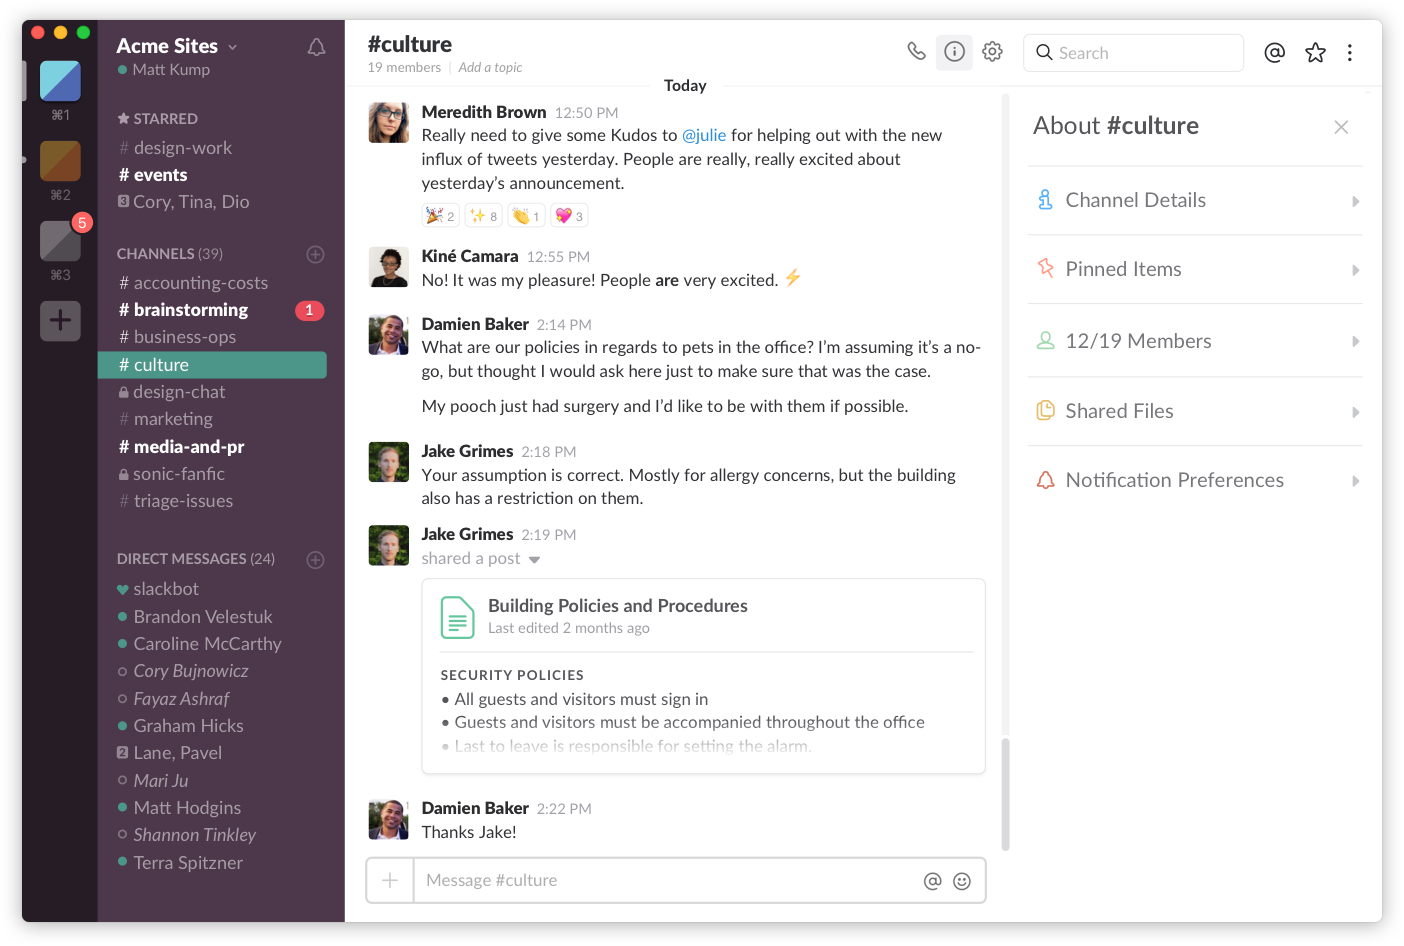 Image of a screen-capture of the Slack app in action, displaying the app interface with chat and conversation boxes